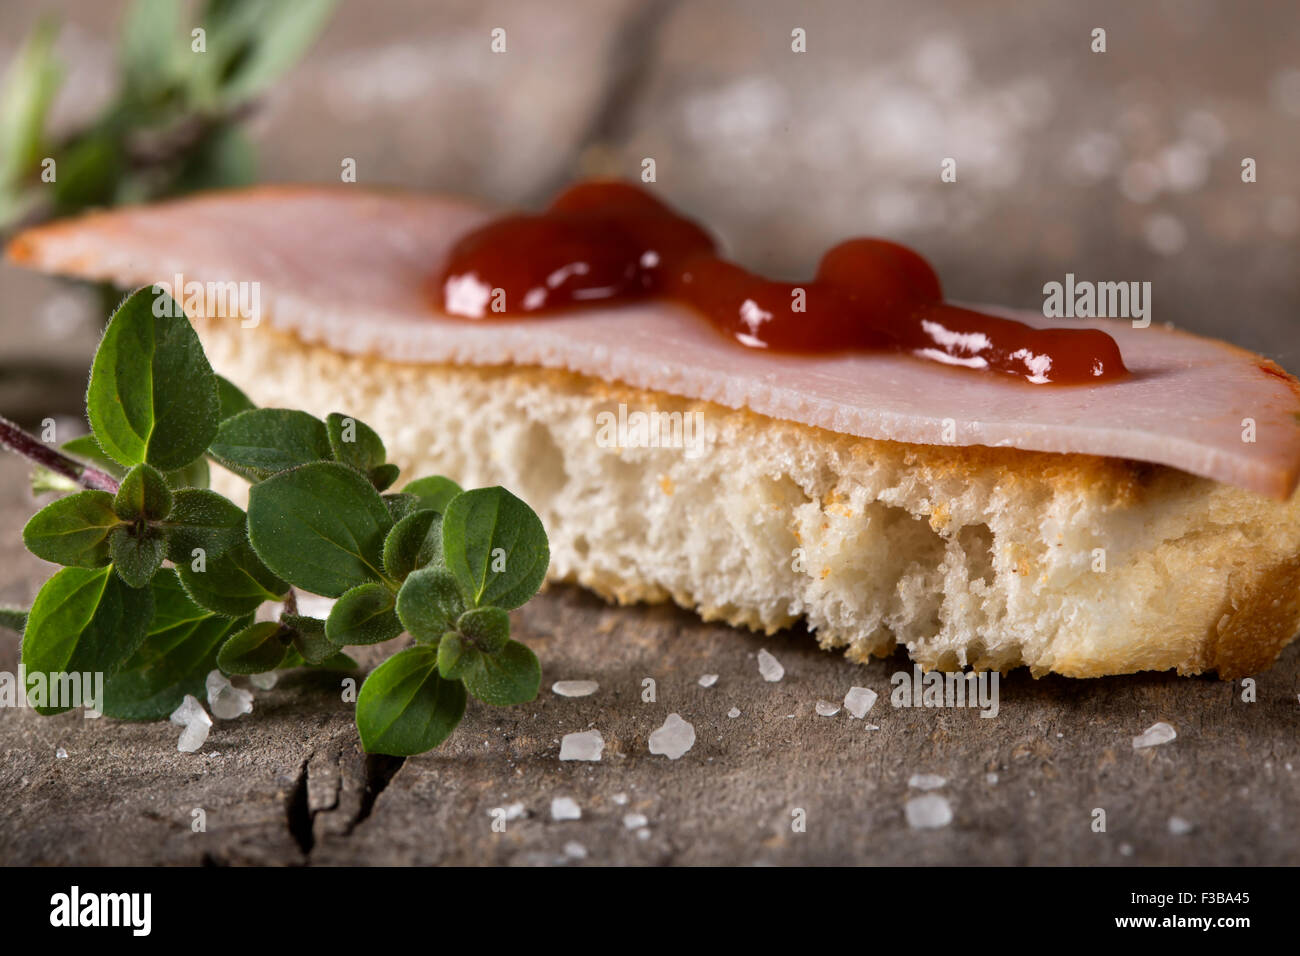 Toasted bread slices with smoked meat over rustic wooden background Stock Photo